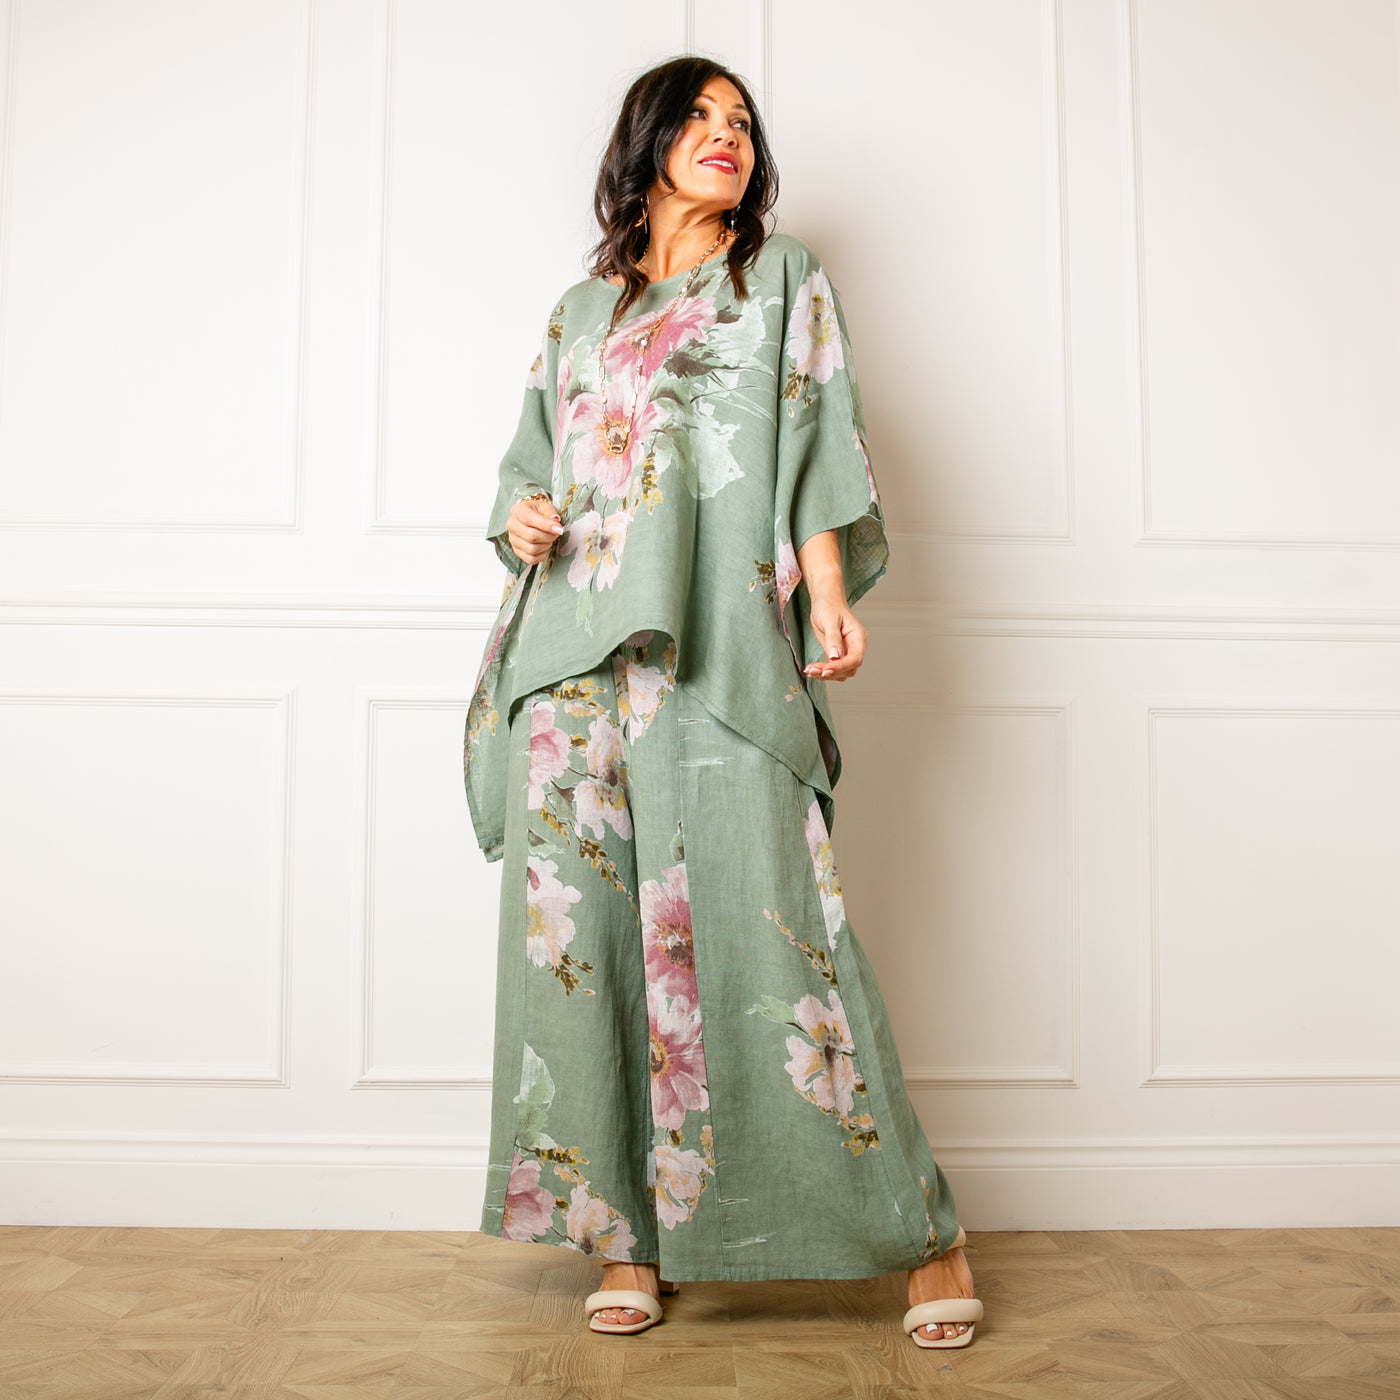 The sage green Bouquet Print Linen Trousers in a wide leg silhouette with pockets on either side